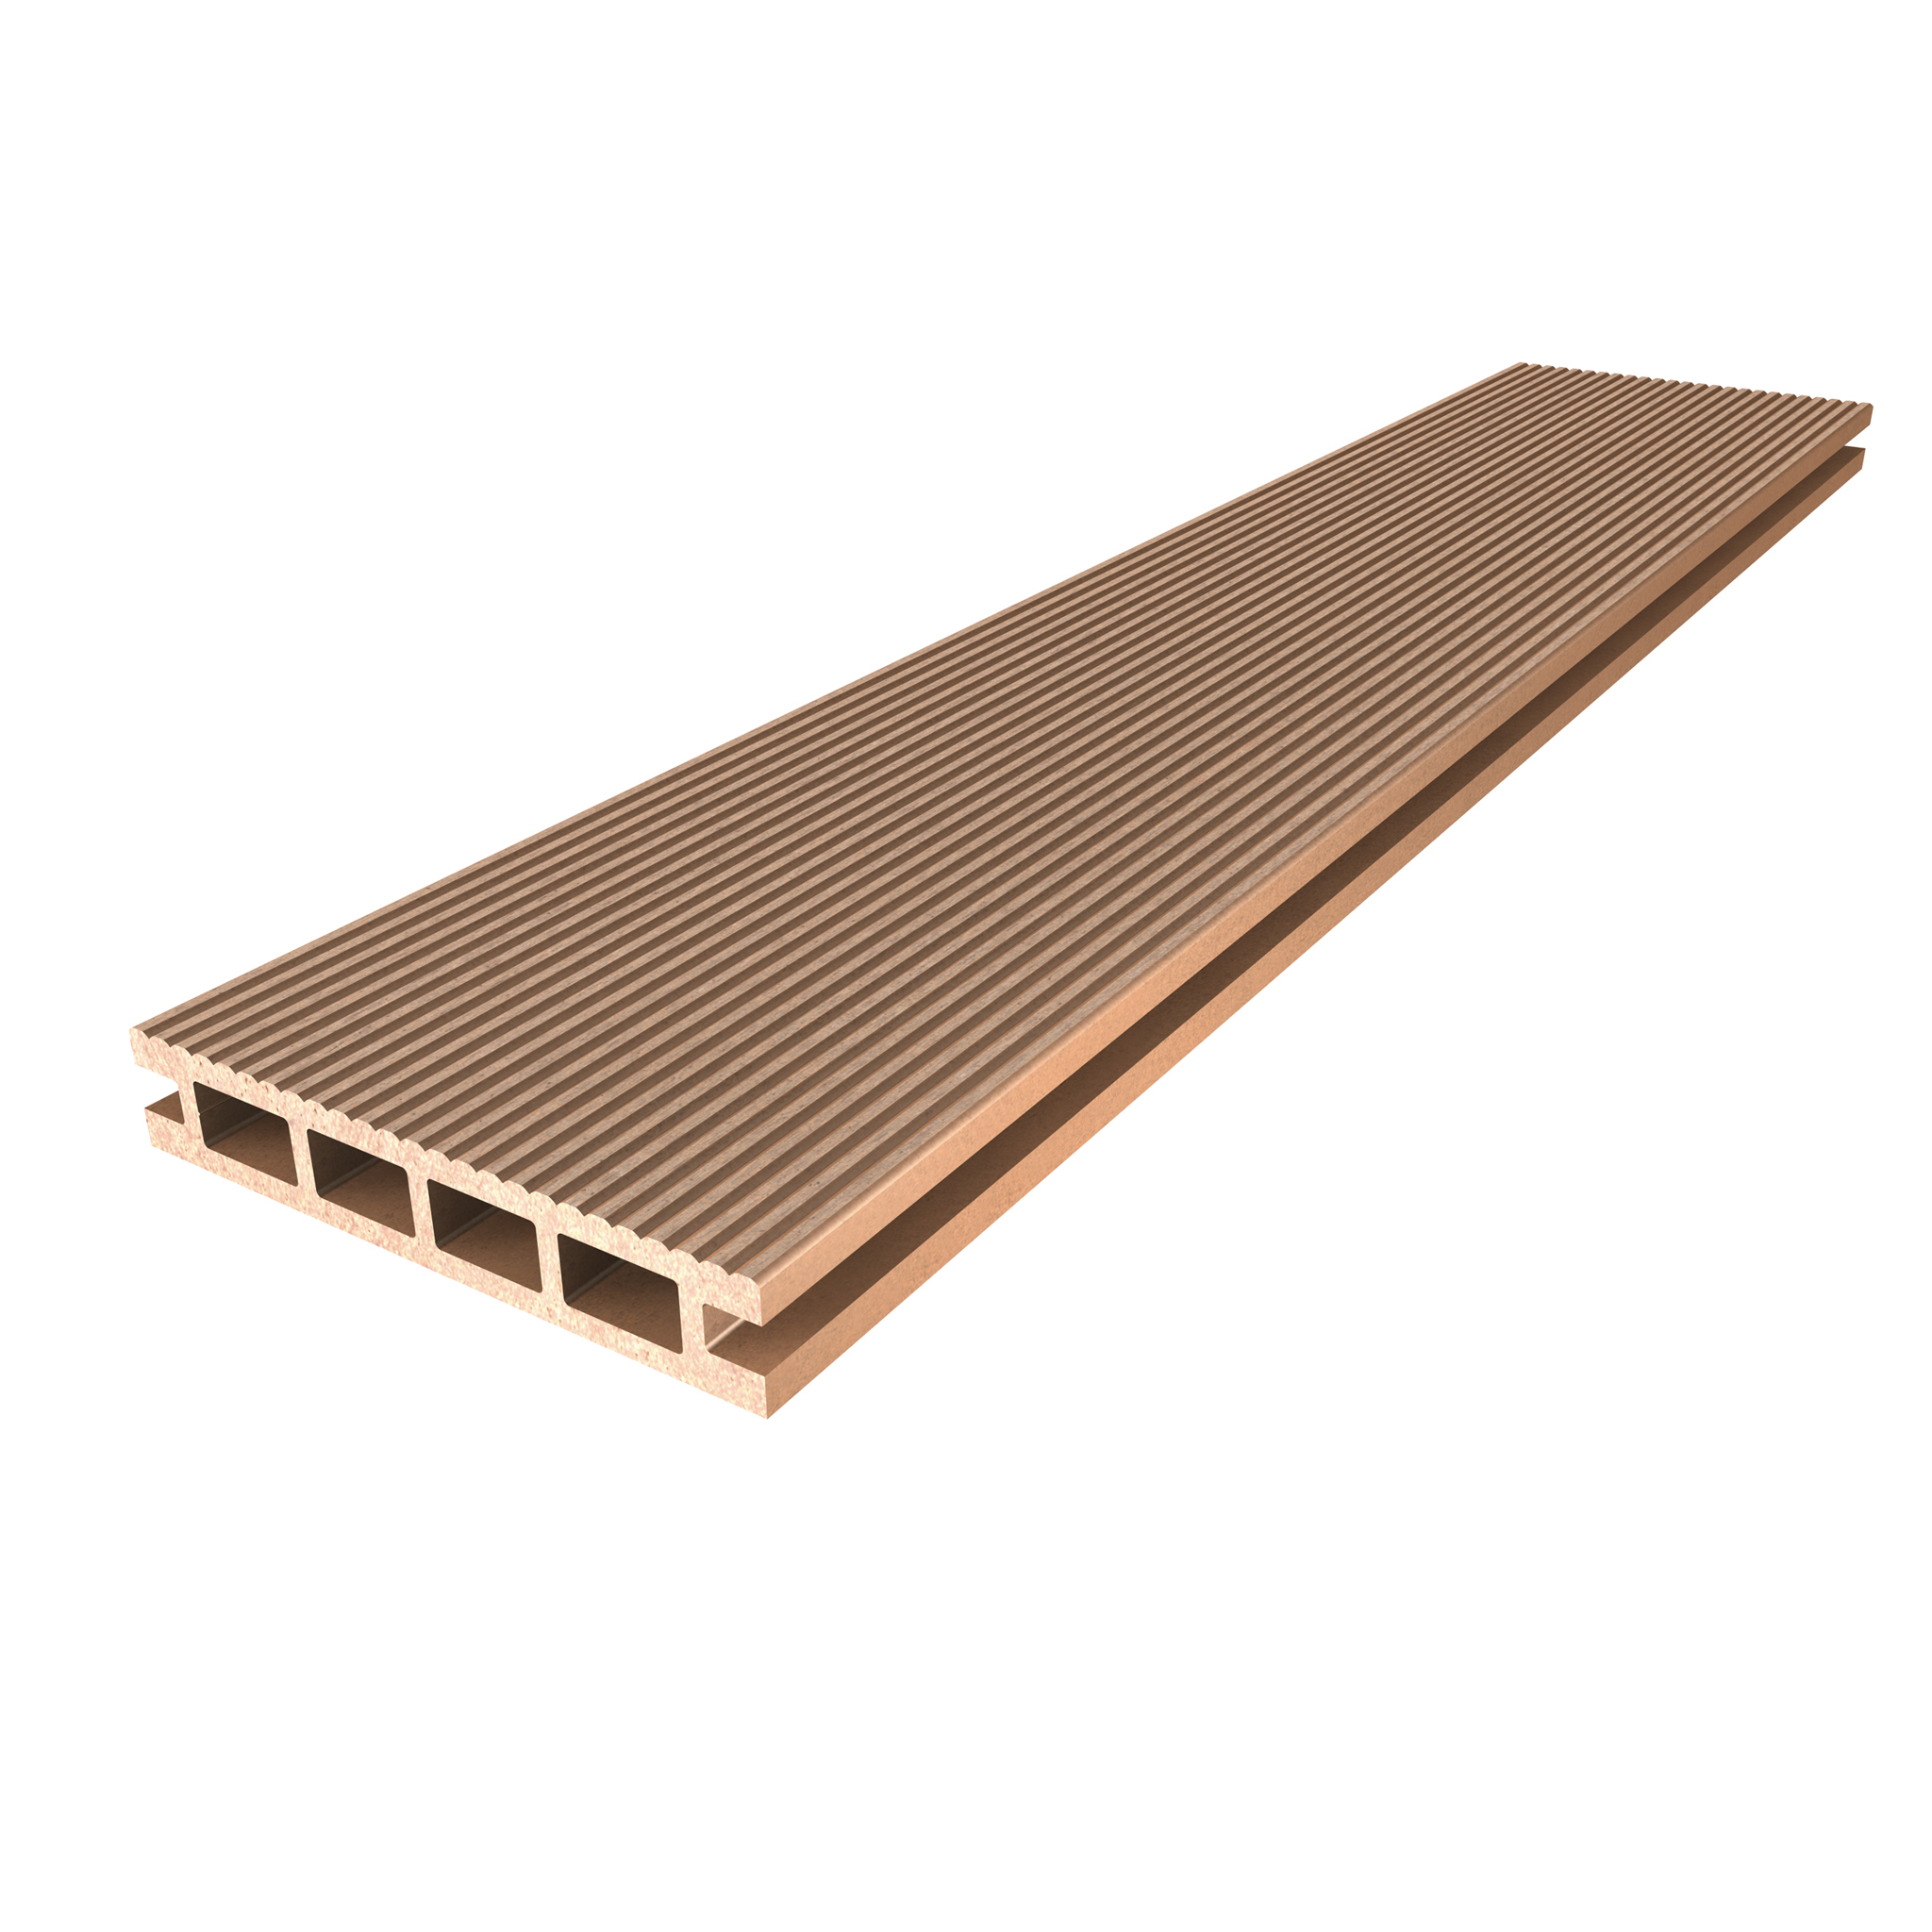 Resysta decking board grooved/smooth